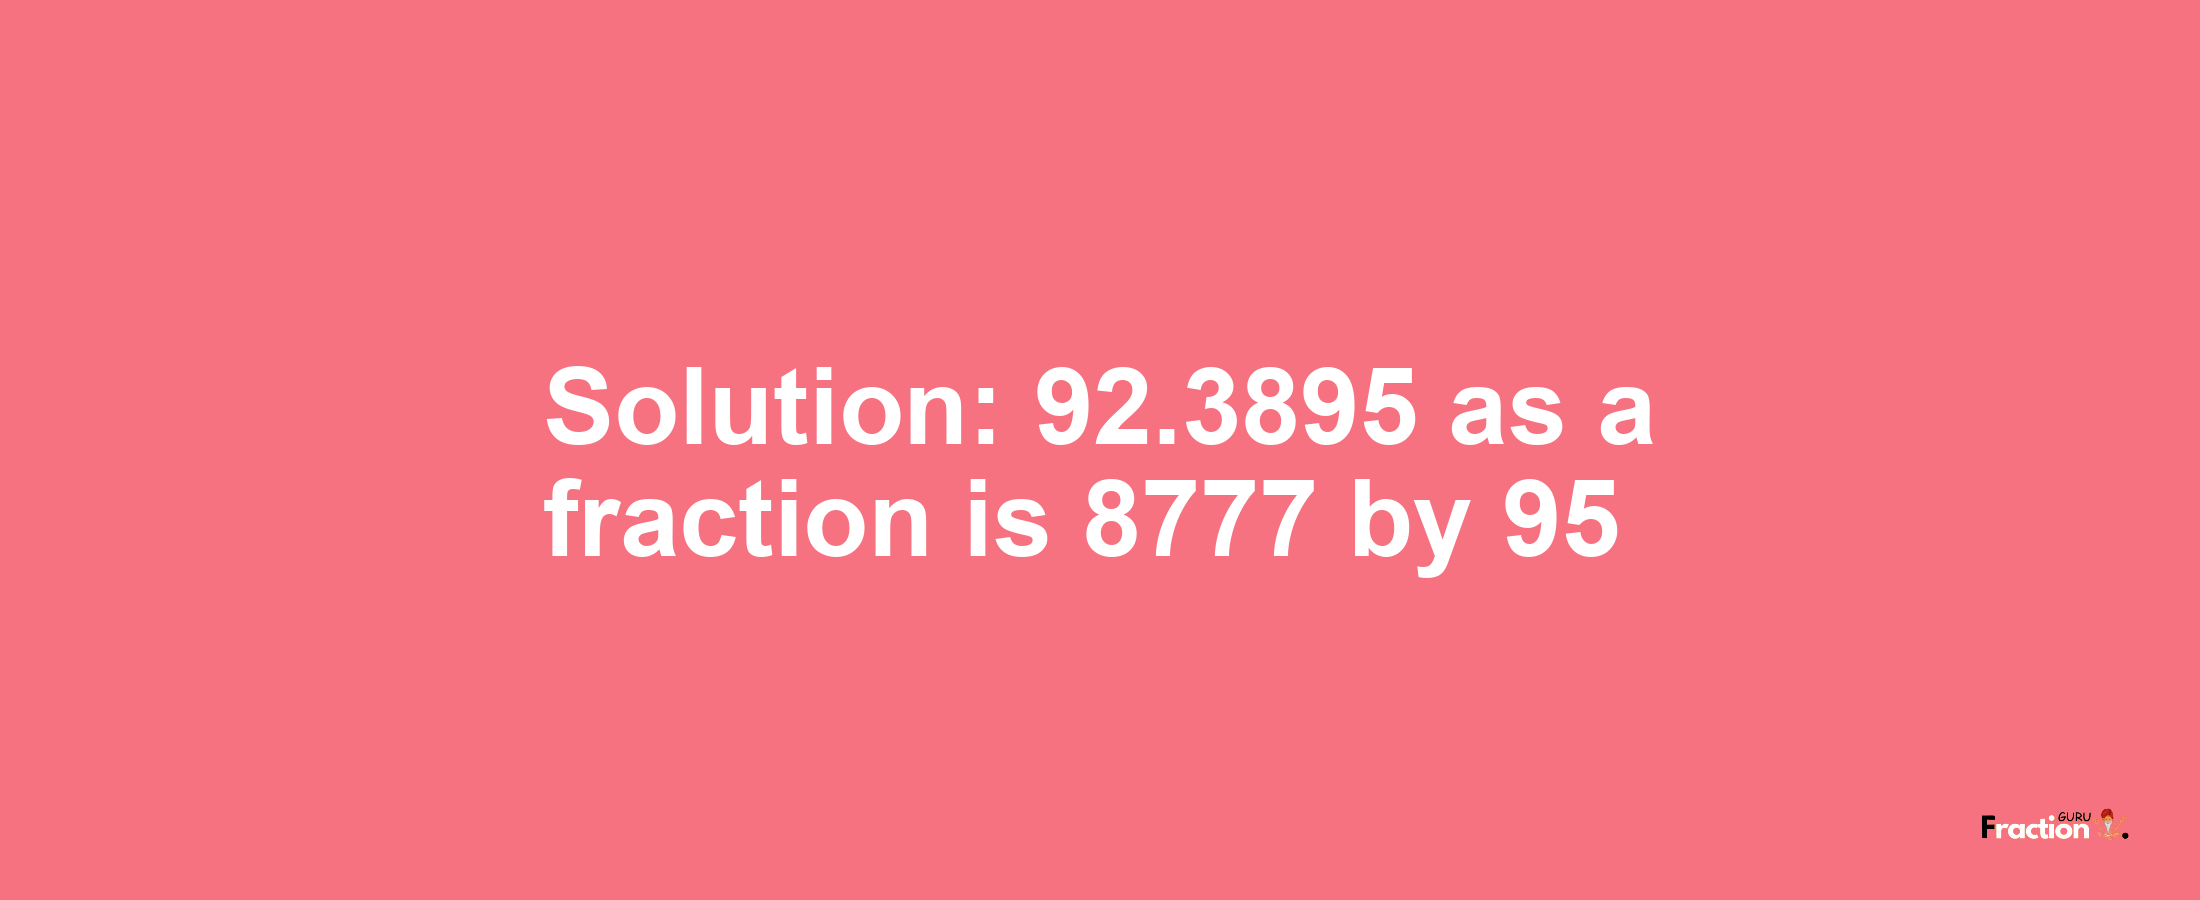 Solution:92.3895 as a fraction is 8777/95